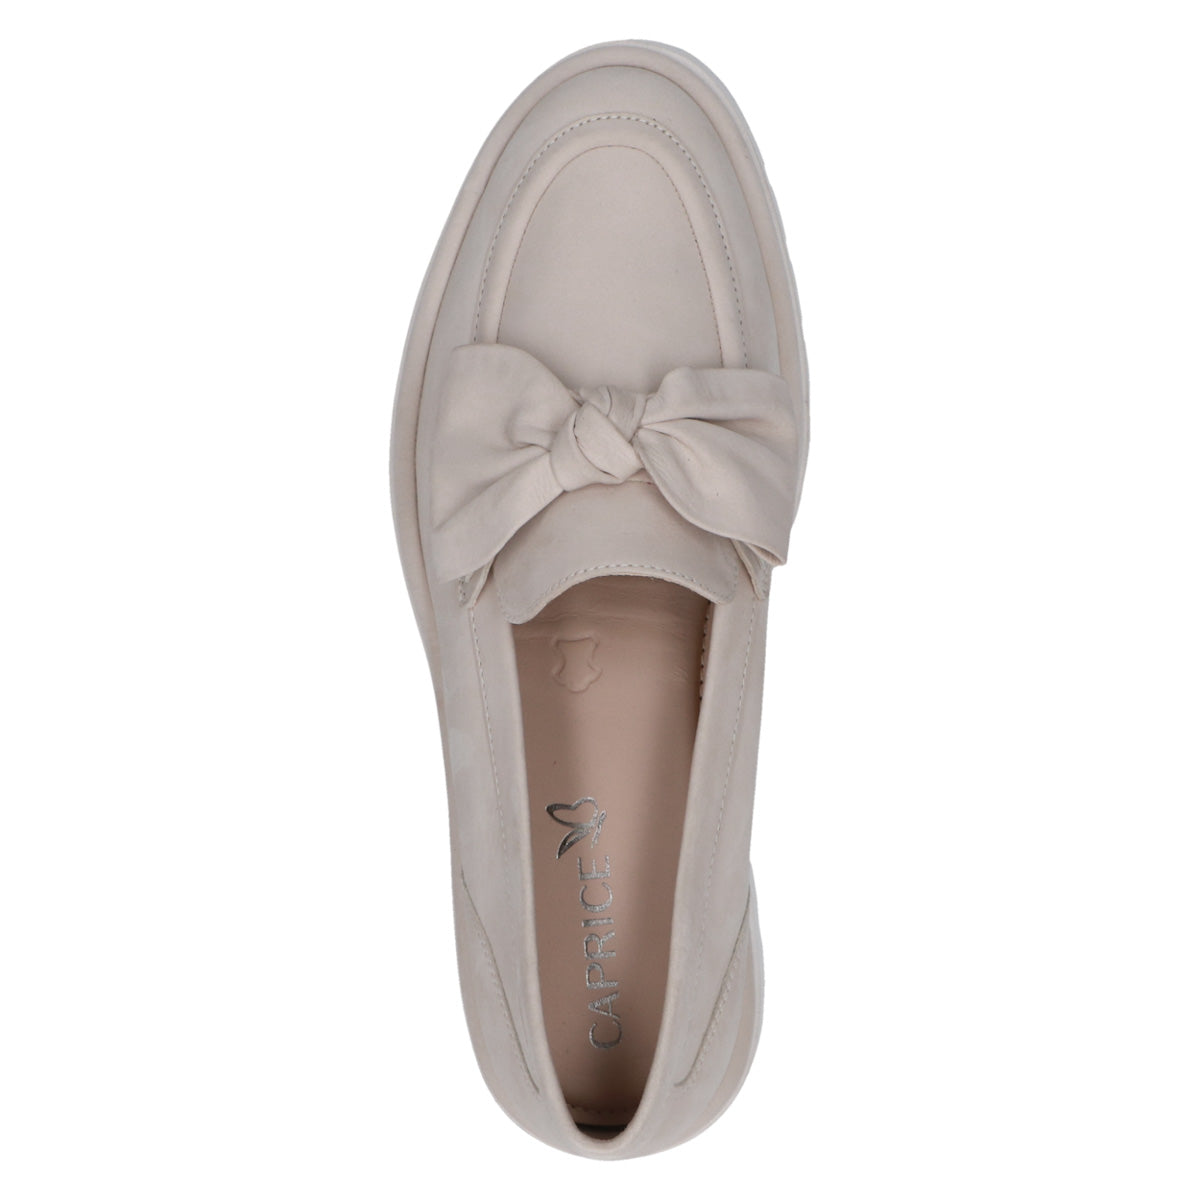 Caprice Beige Loafer with Bow Detail and Chunky Sole